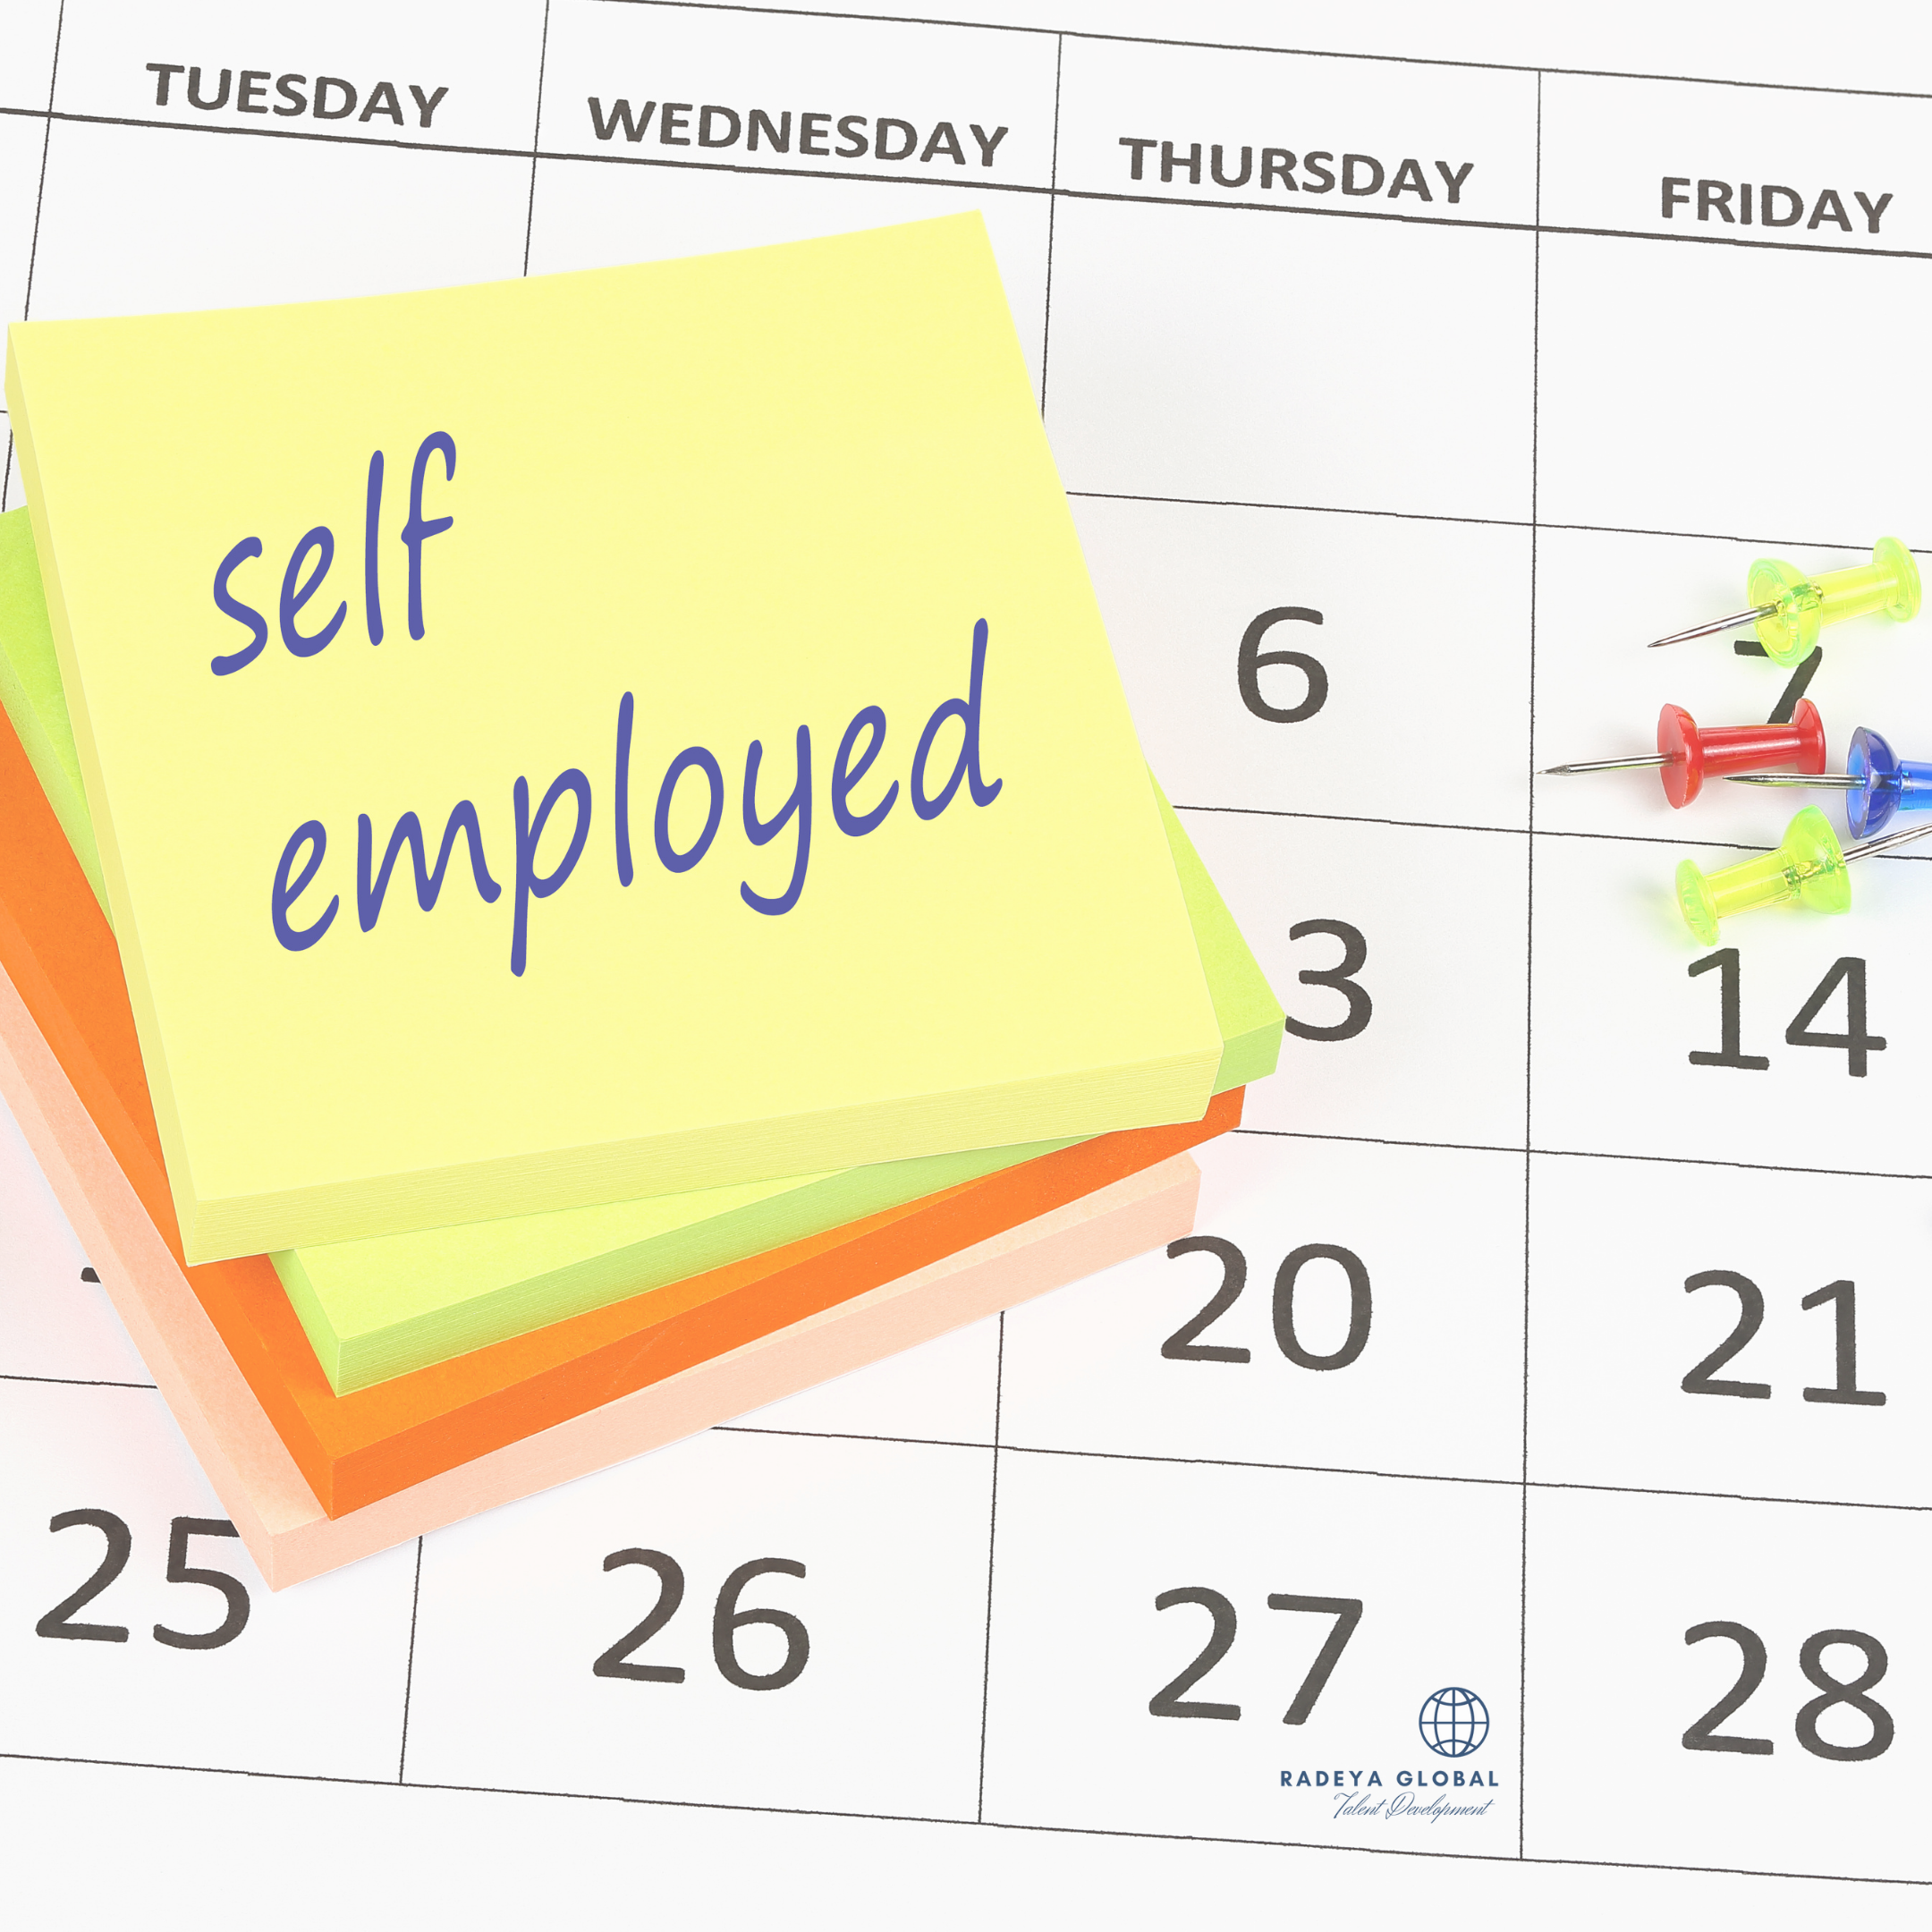 Calendar and sticky note with self employed written on it